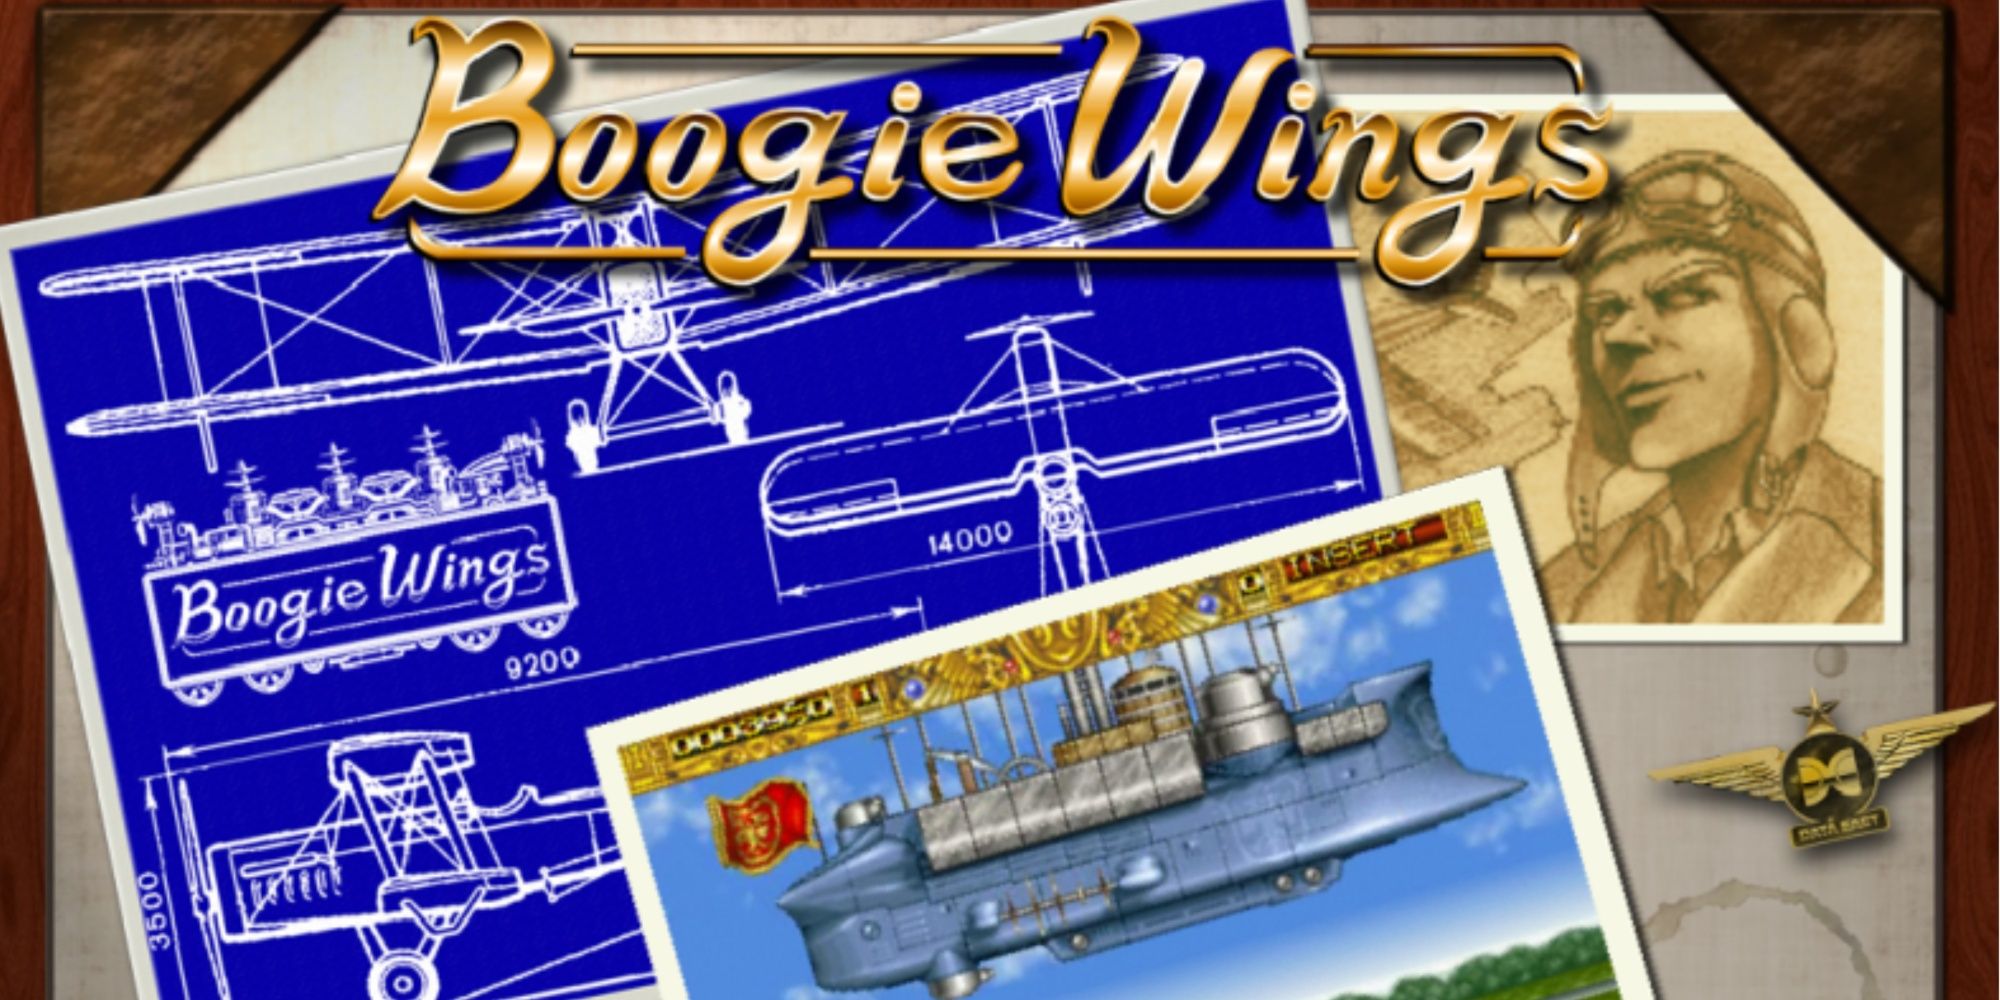 Boogie Wings Promo Image